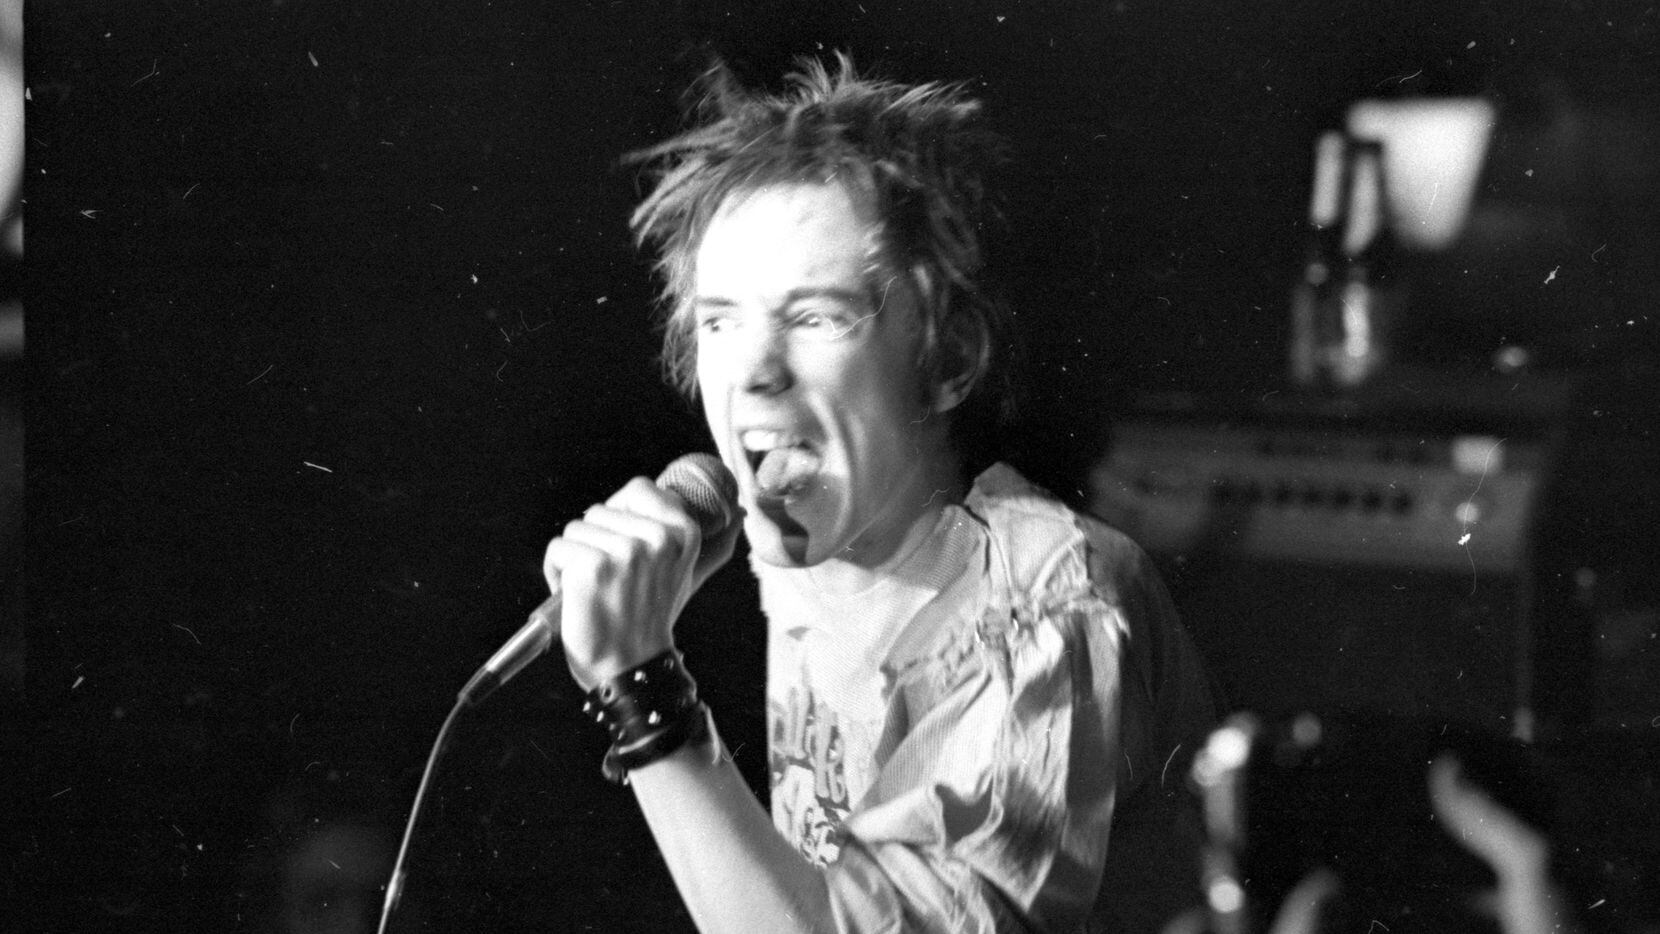 John Lydon, aka Johnny Rotten, the lead singer of The Sex Pistols, performs at the Longhorn...